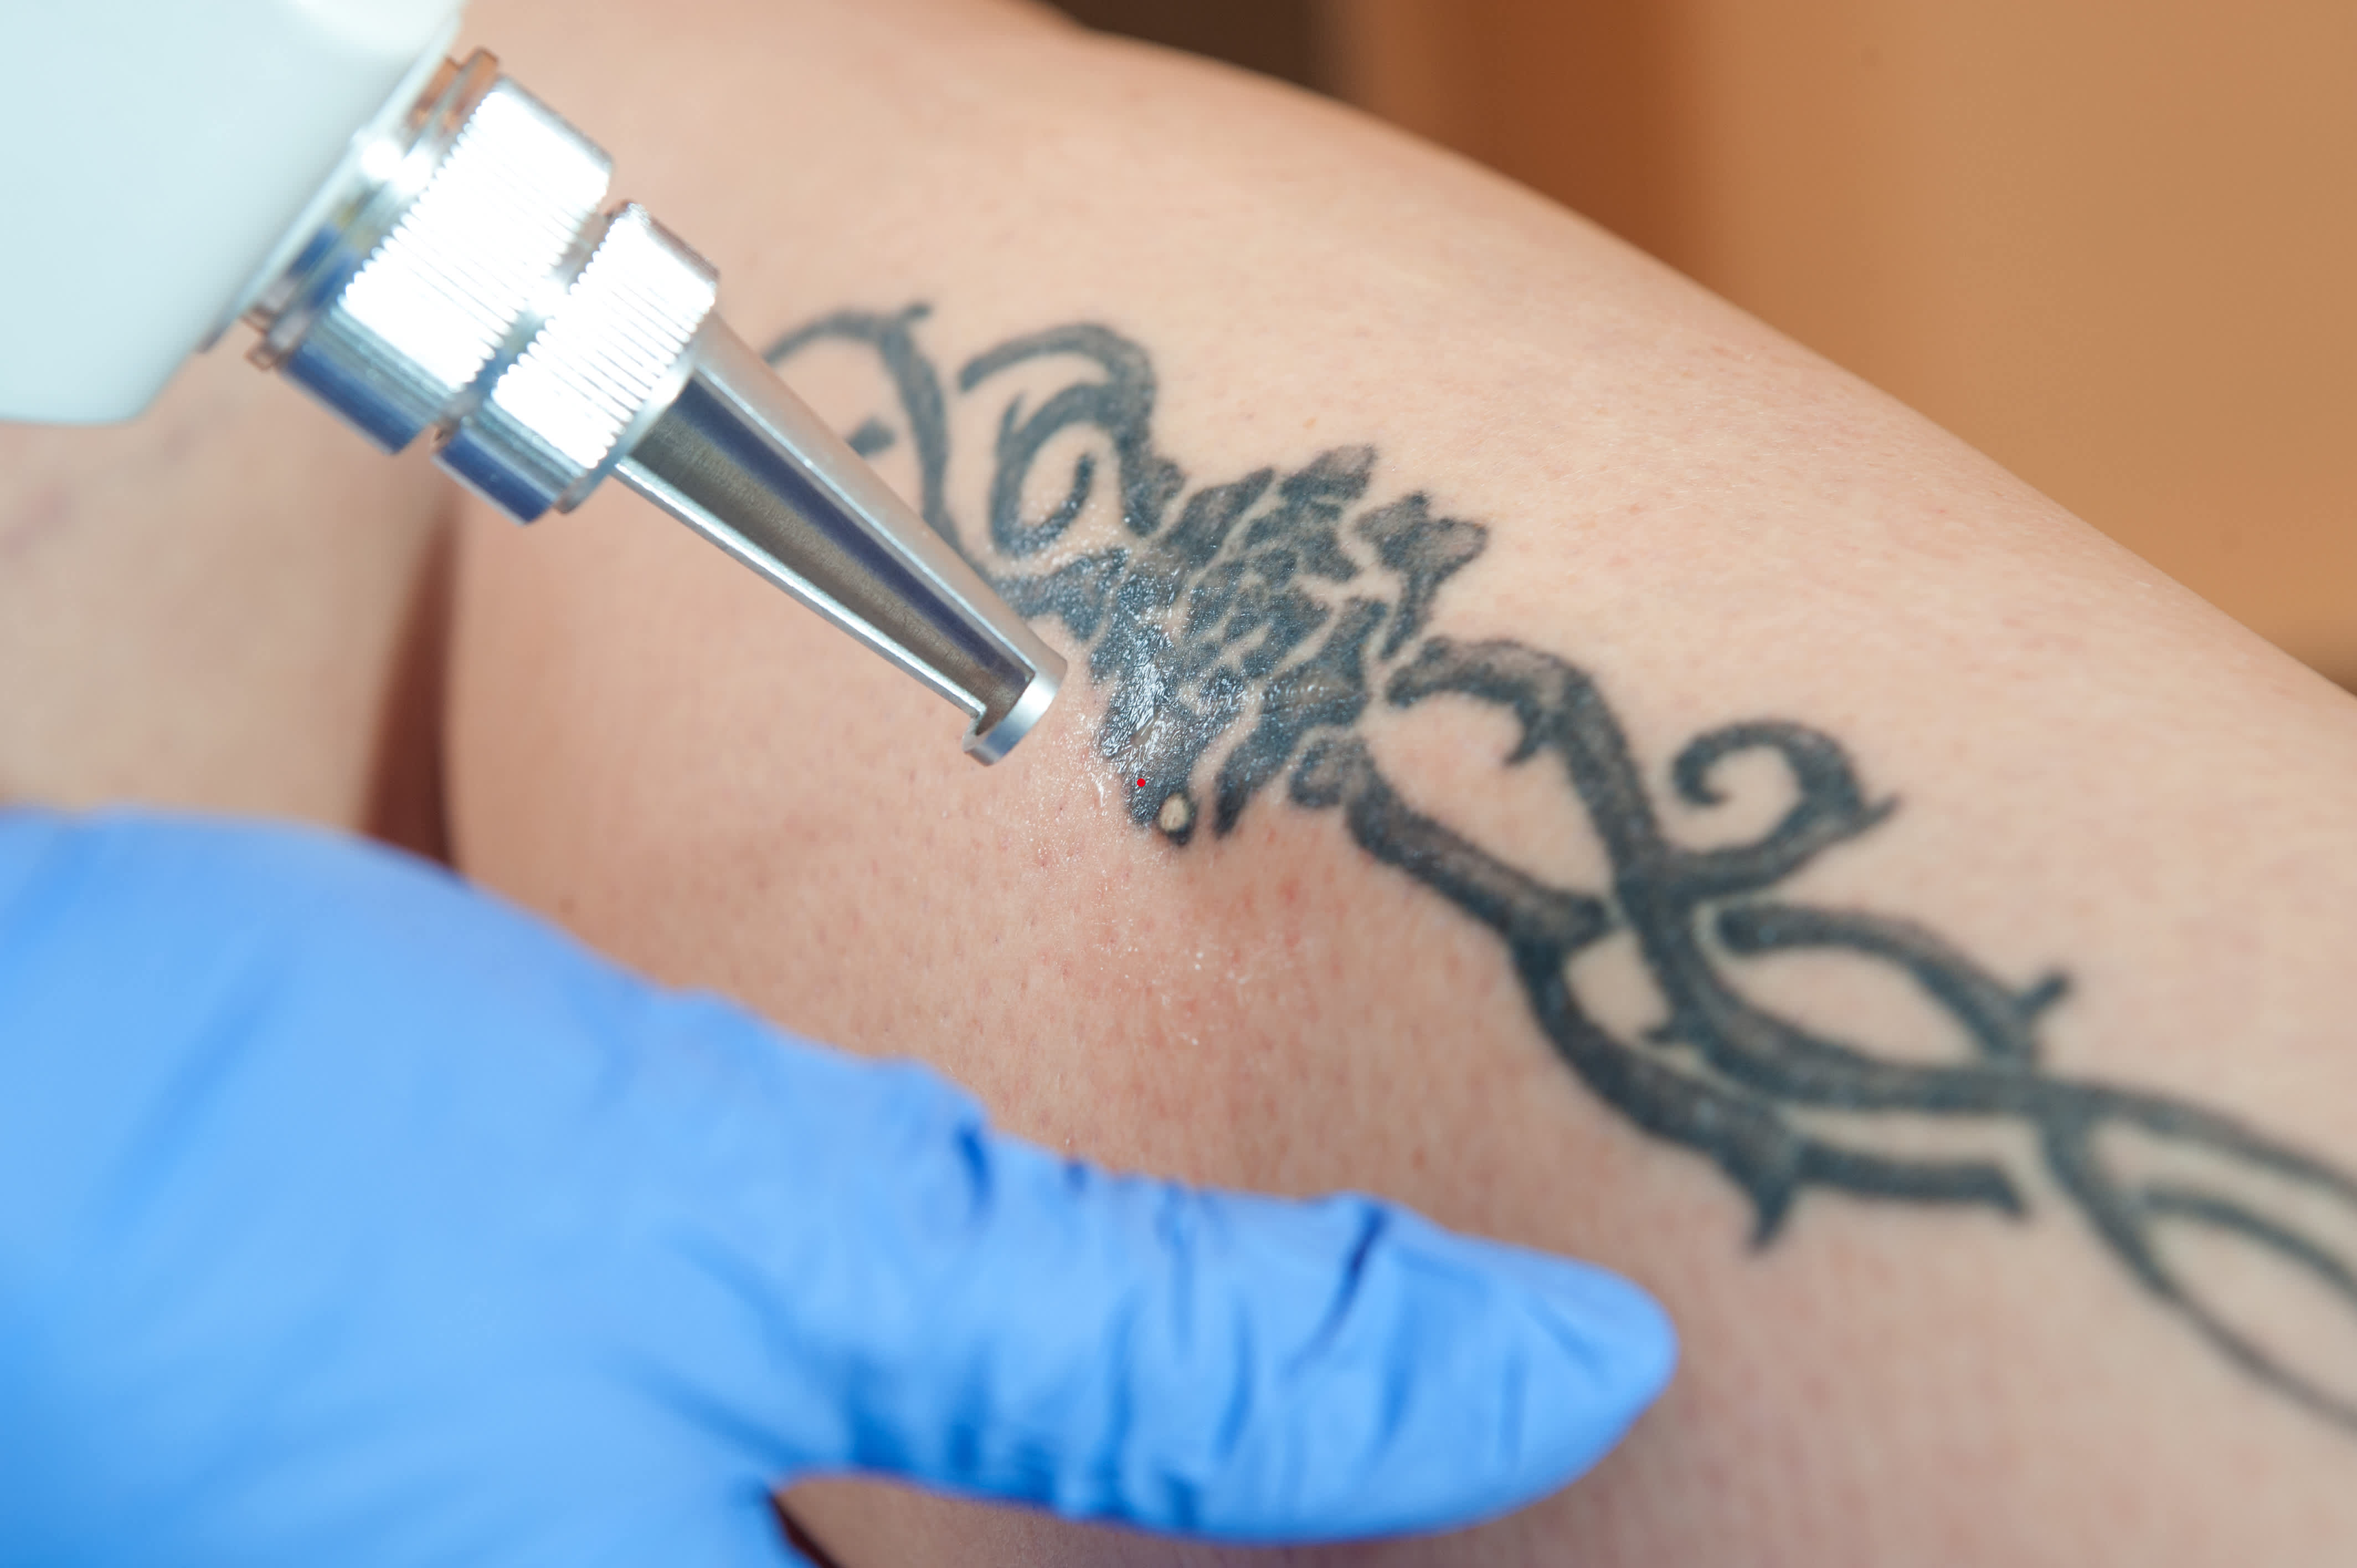 How Much of Your Medical History Should Tattoo Artists Know?